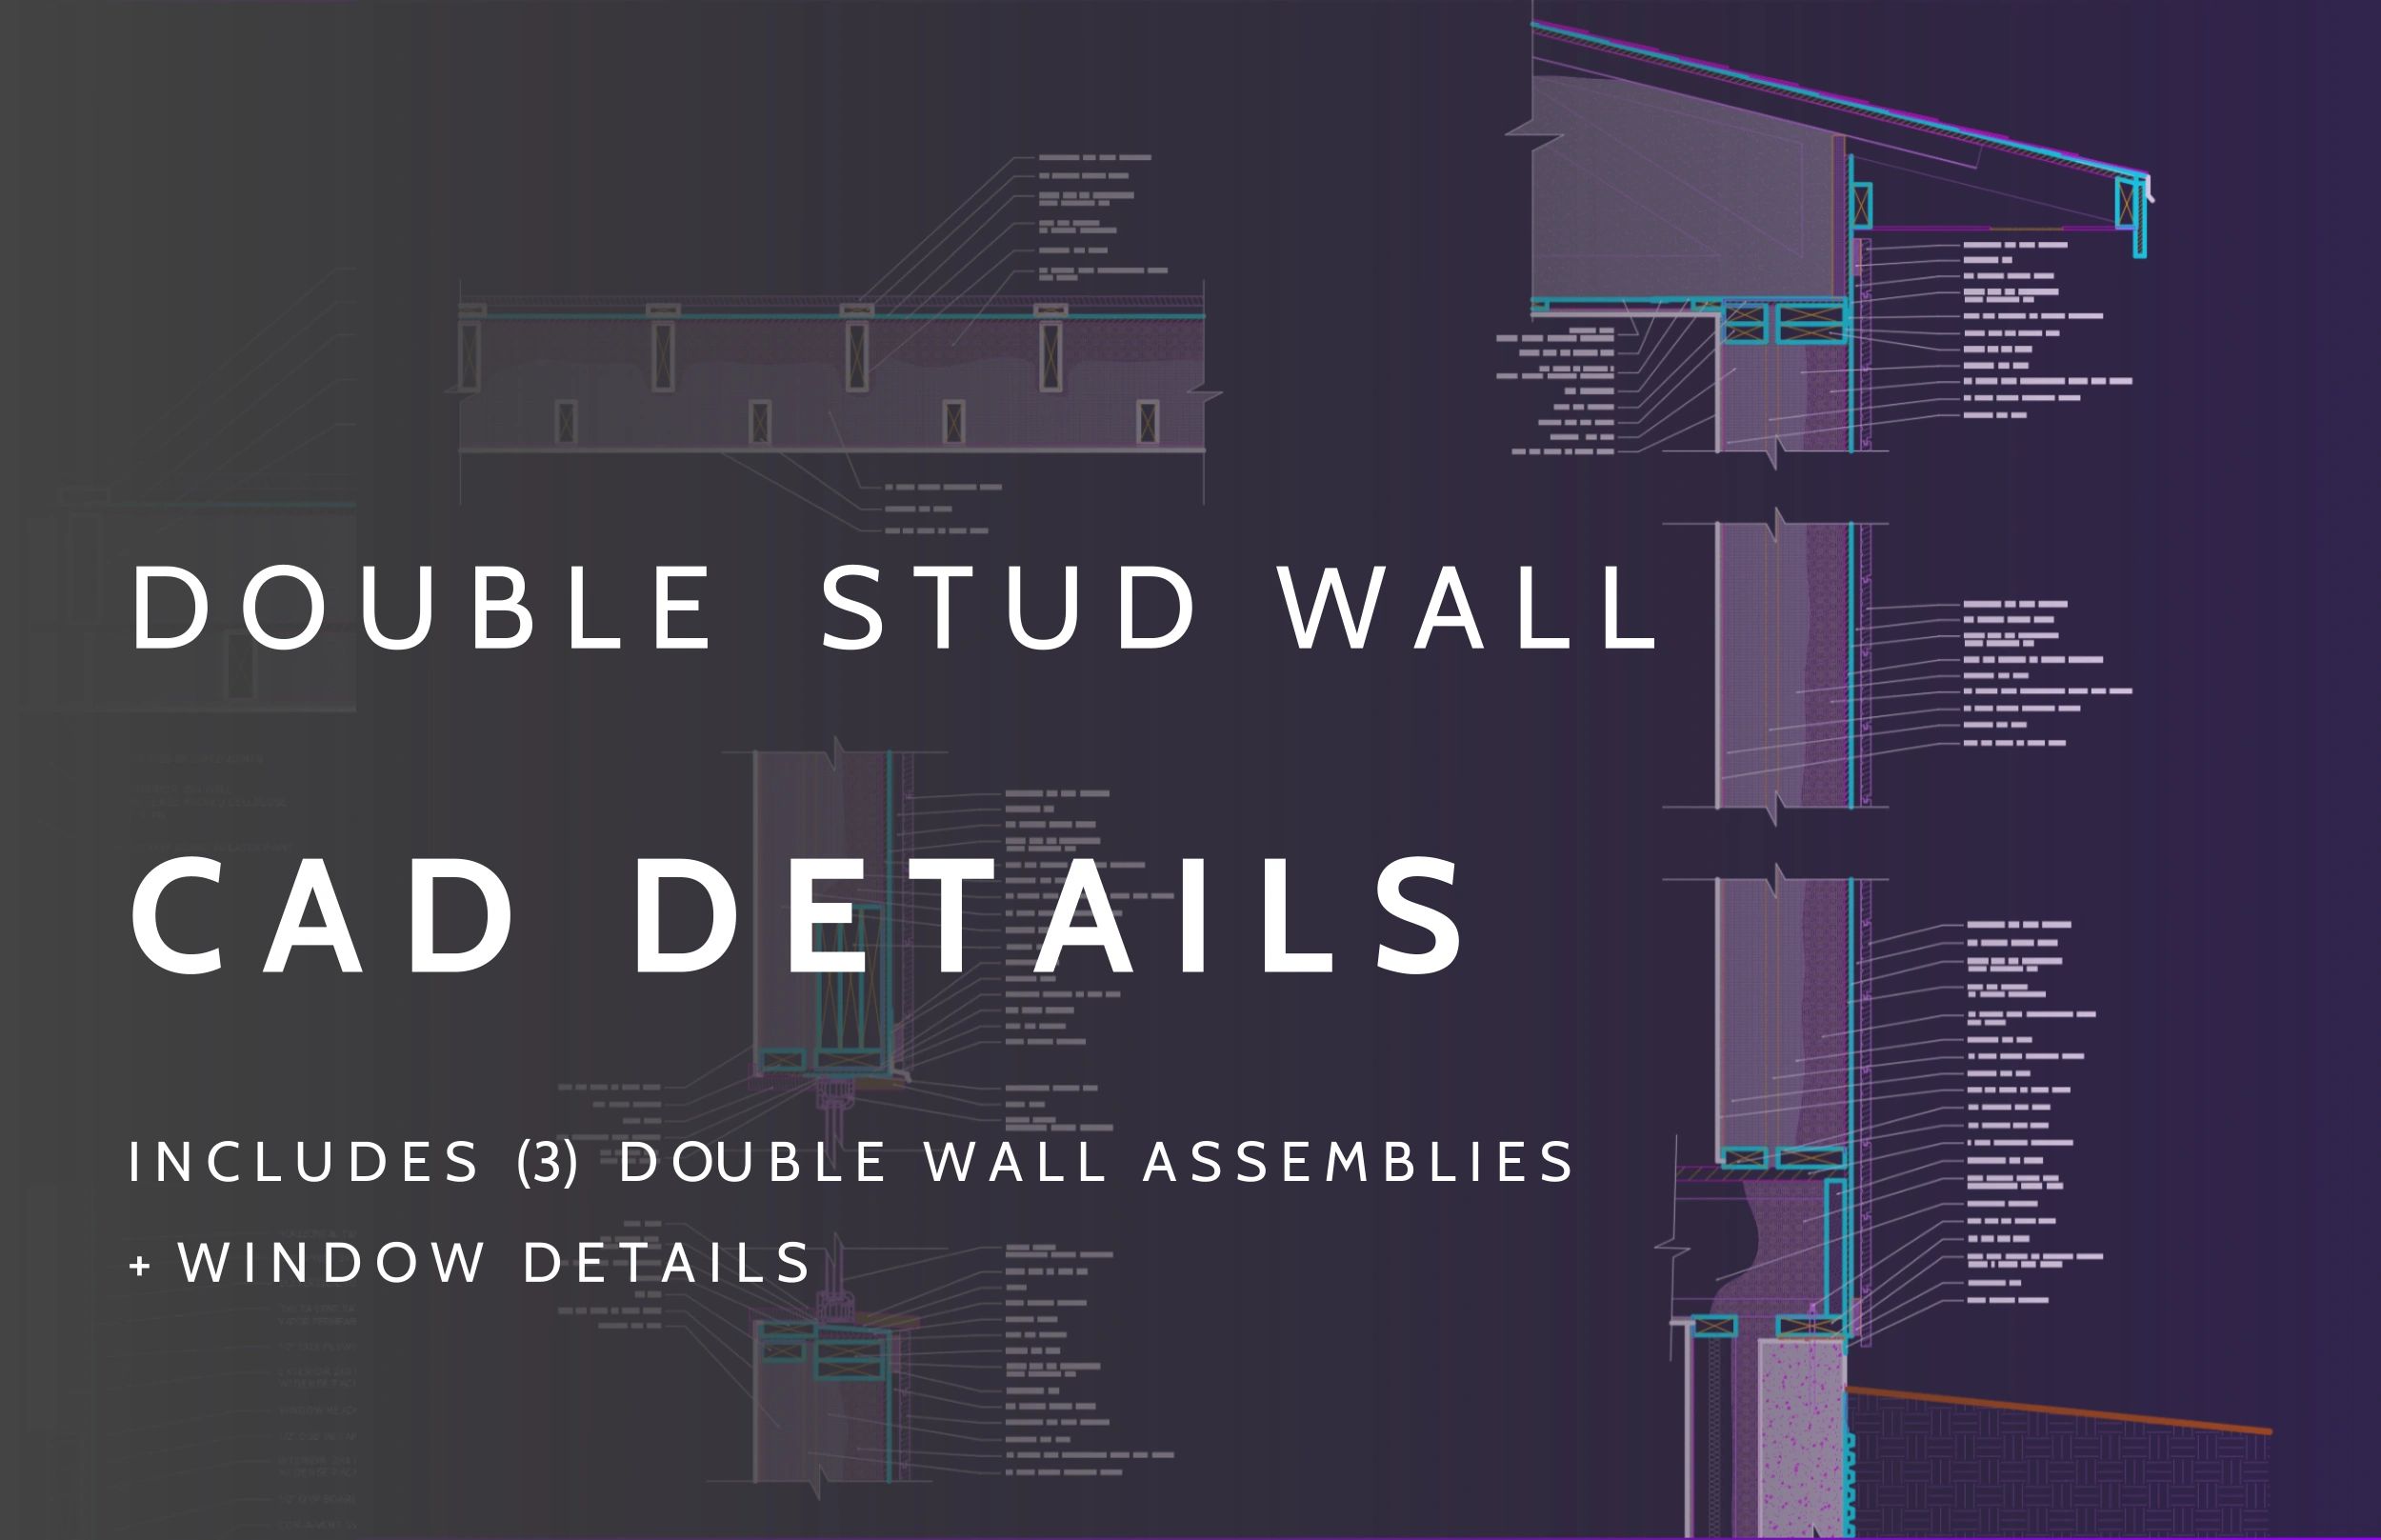 Double Stud Wall. What Is It? What's It For